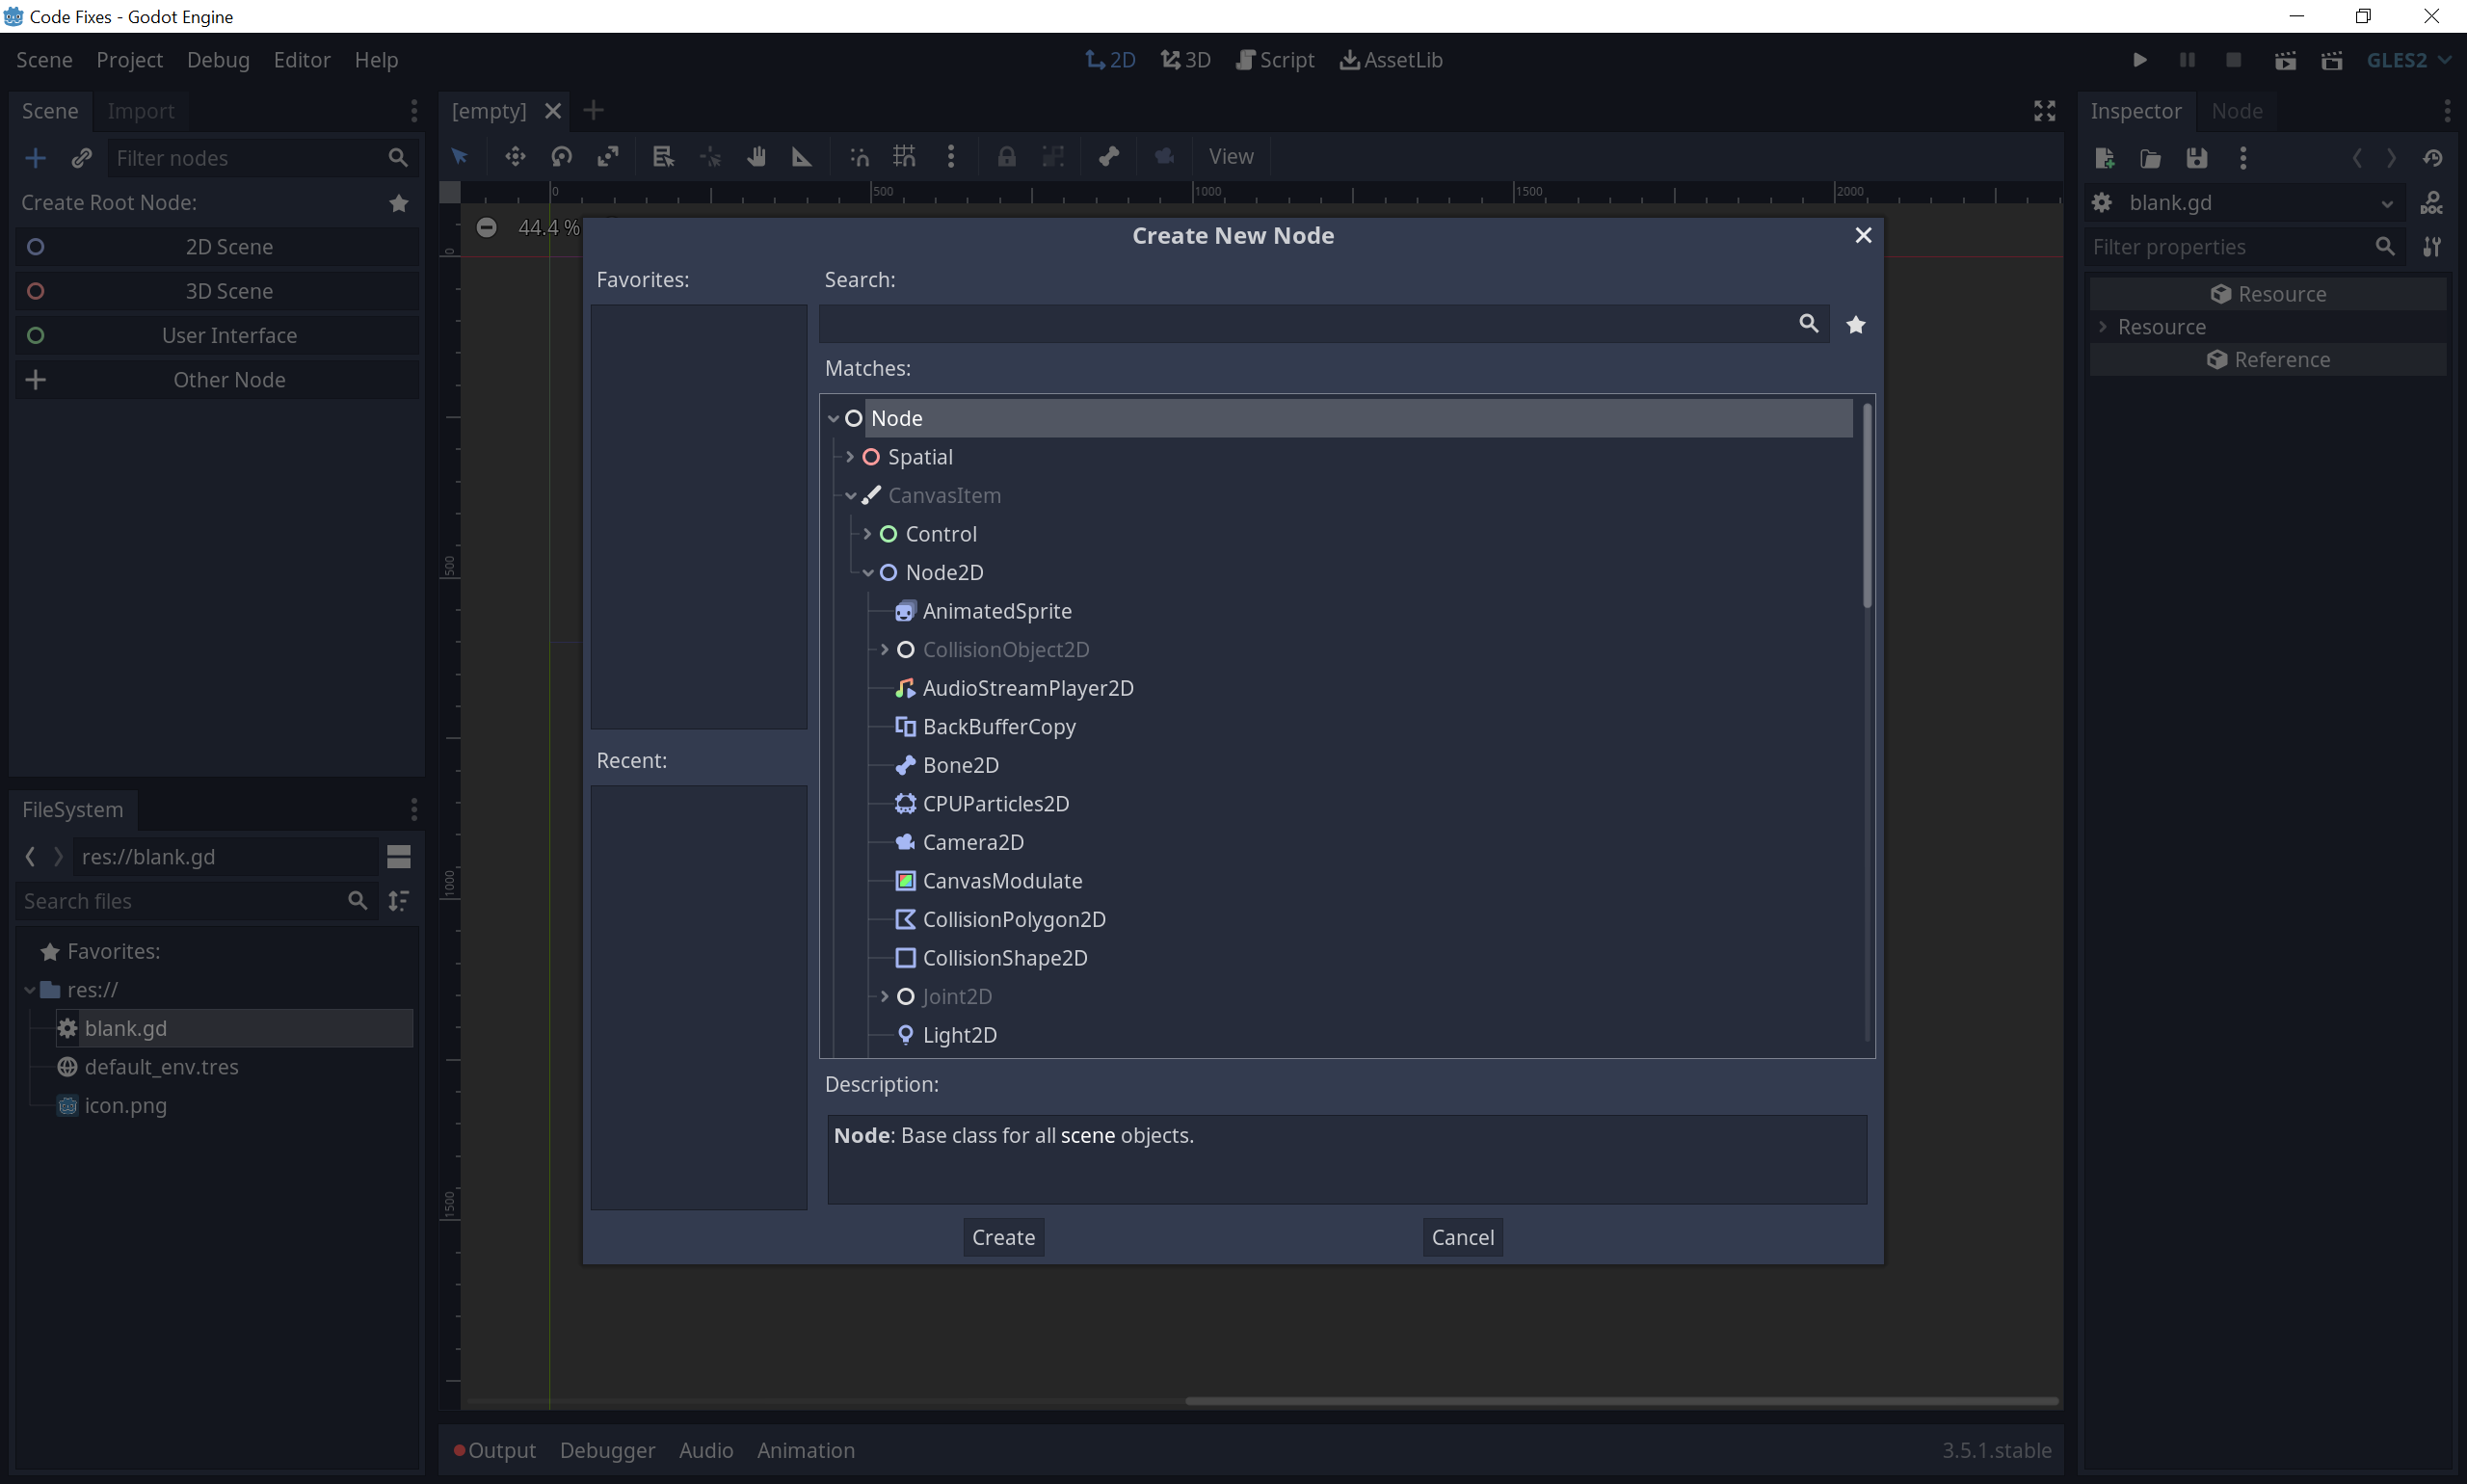 **Figure 9:** Since Godot bundles functions in nodes, it is enough to add nodes to extend the project. This improves the UX and speeds up the workflow.